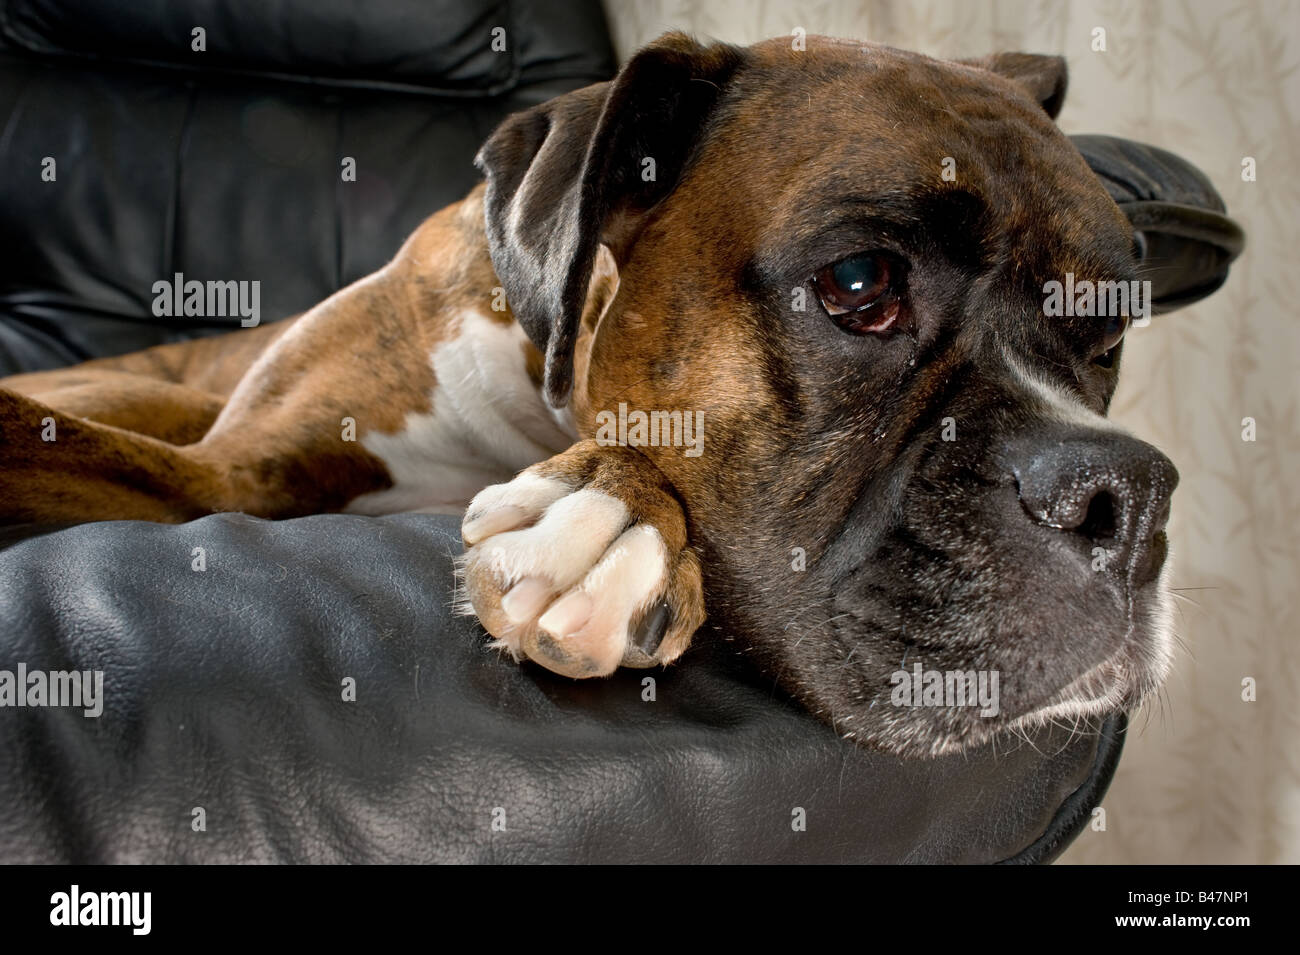 Close up of a brown and white boxer dog on a black leather chair looking sad Stock Photo